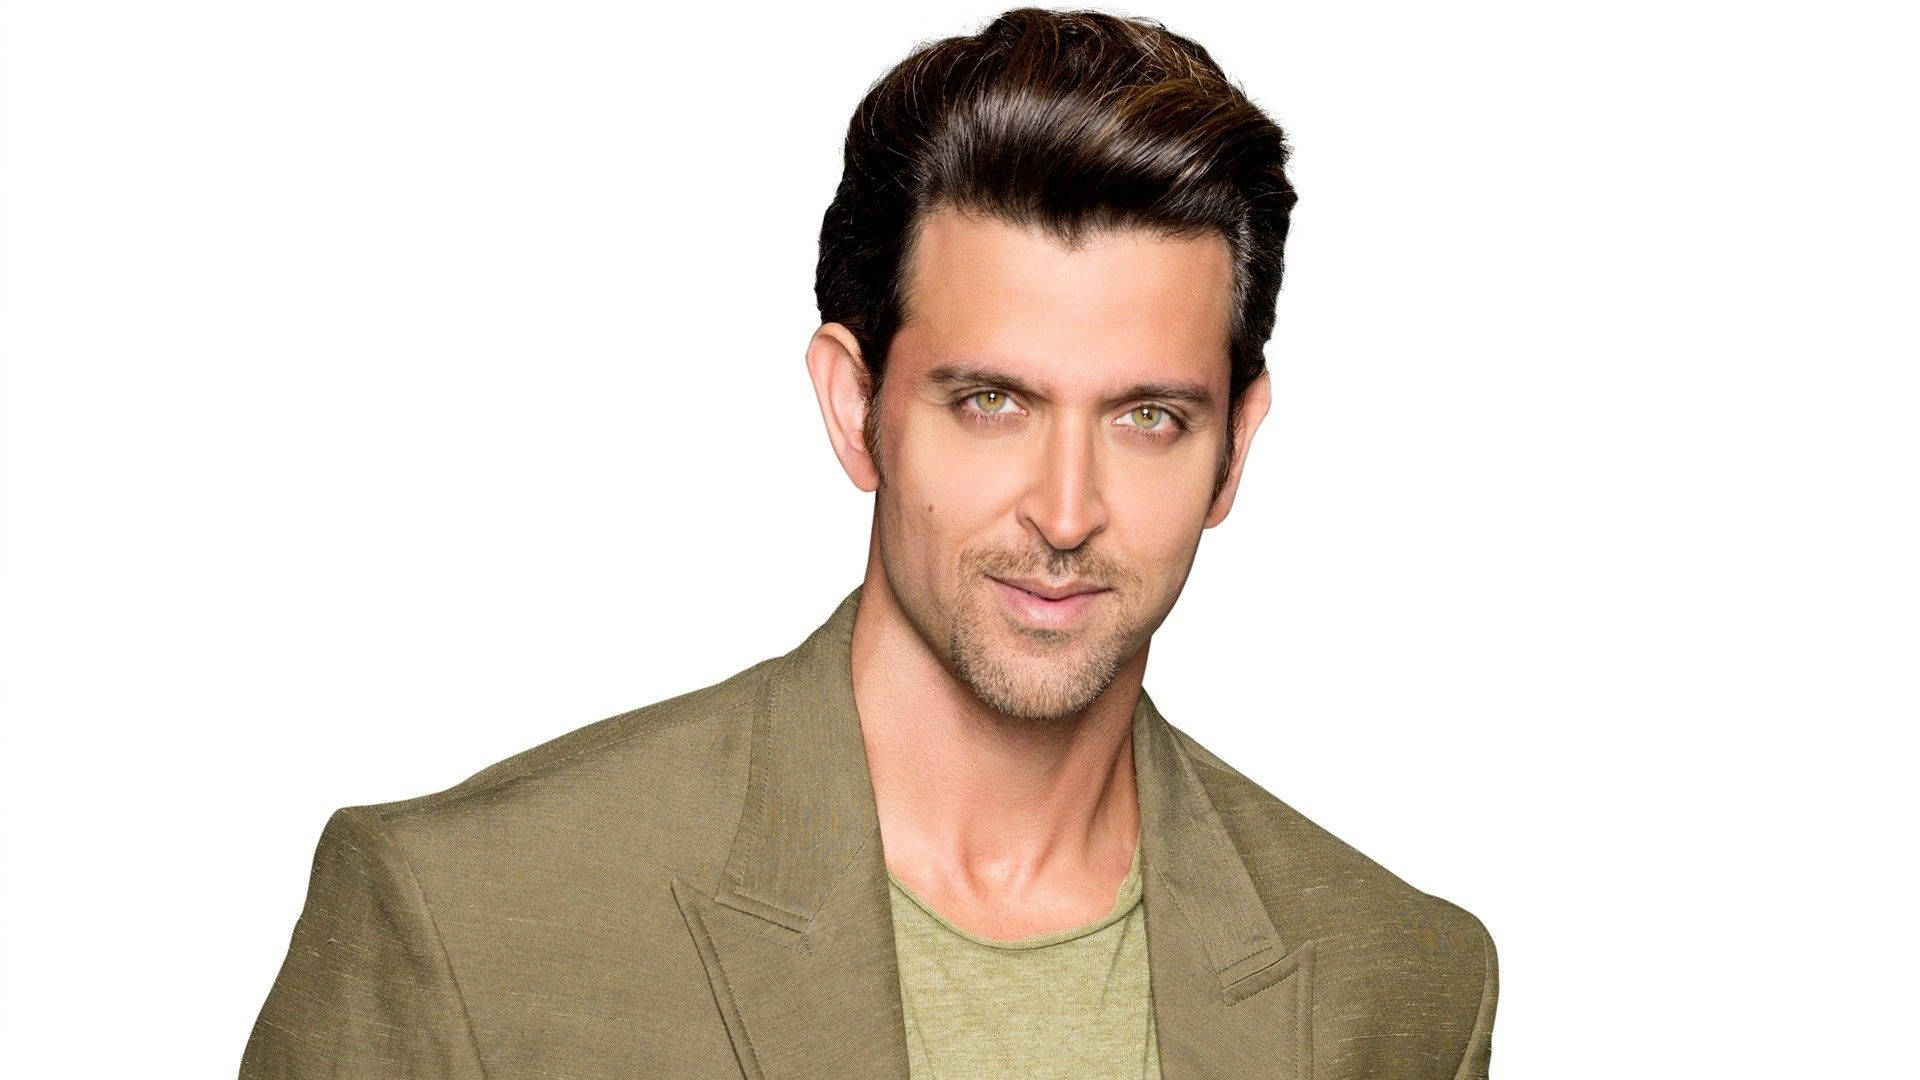 Hrithik Roshan Looks Dapper in a Stunning Black Suit as He Treats Fans With  Some of His Pics From the Shoot | LatestLY